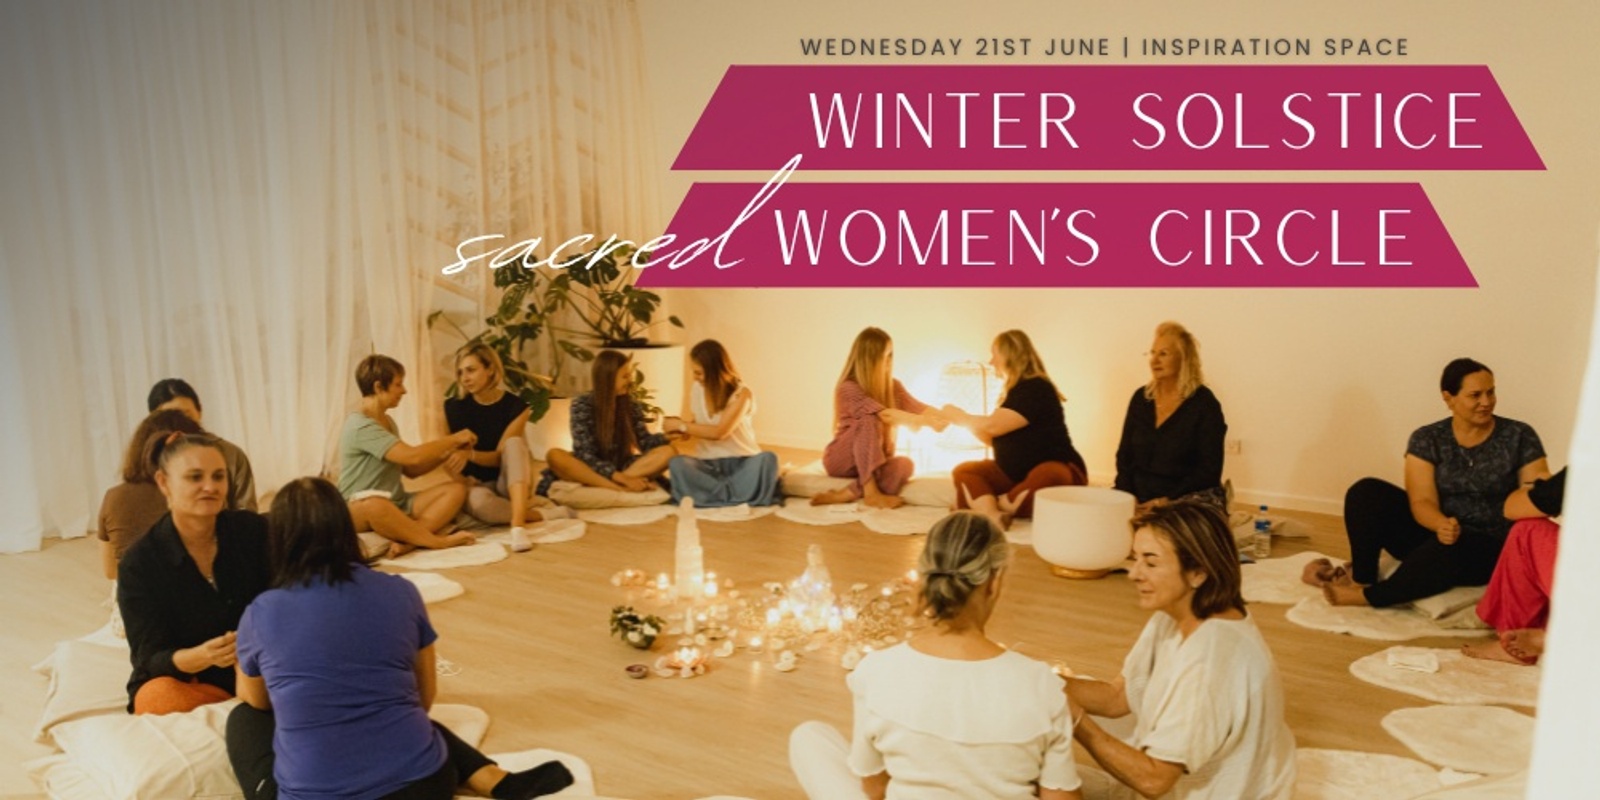 Banner image for Wednesday Tasters – A Sampler for the Soul | Winter Solstice Women's Circle (event by donation)